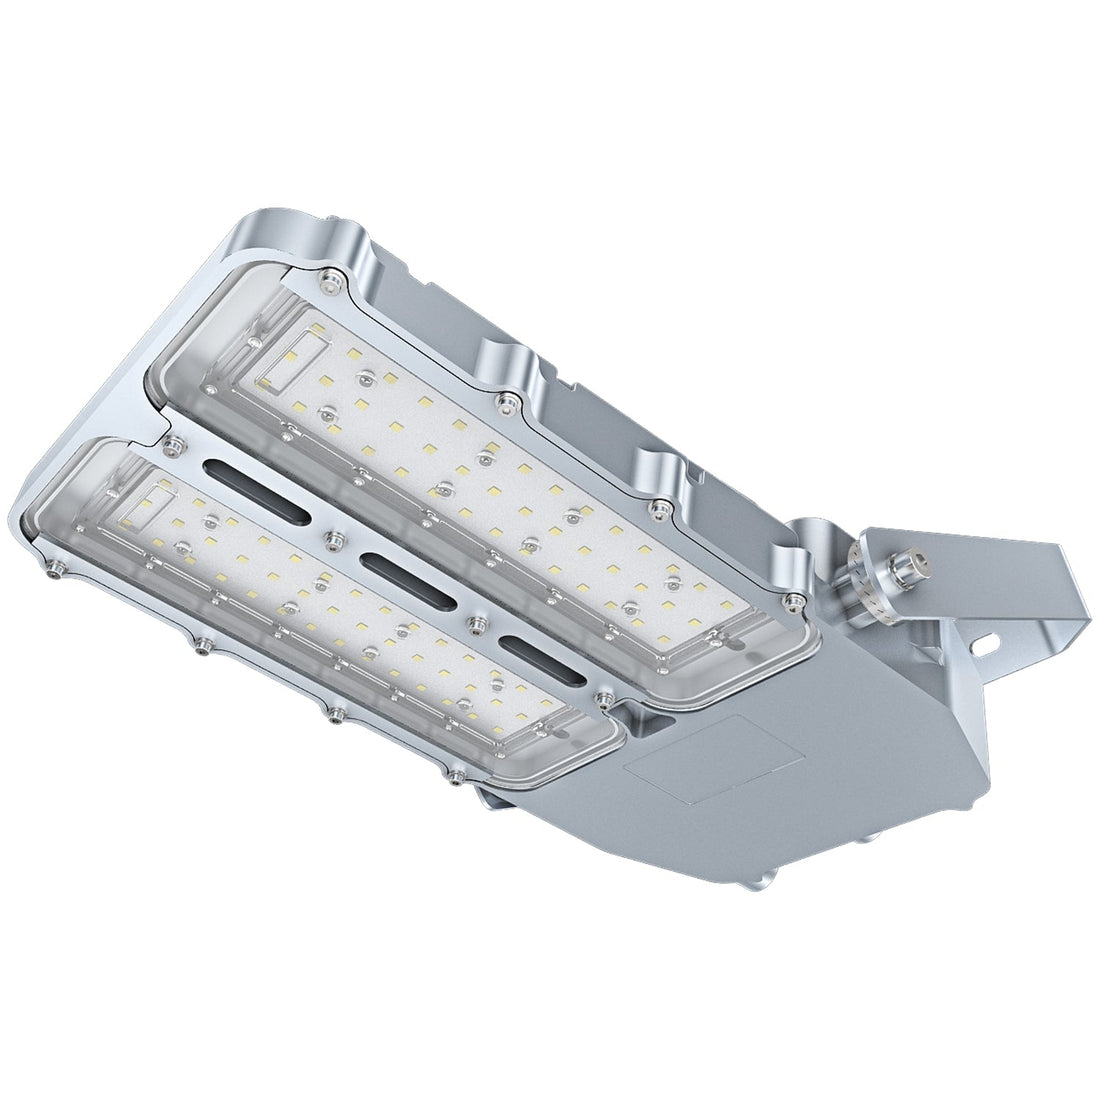 STA124 Series 150W Dimmable LED Explosion Proof Area Light for Hazardous Locations: Powerful and Efficient Lighting Solution with 19500LM and IP66 Protection